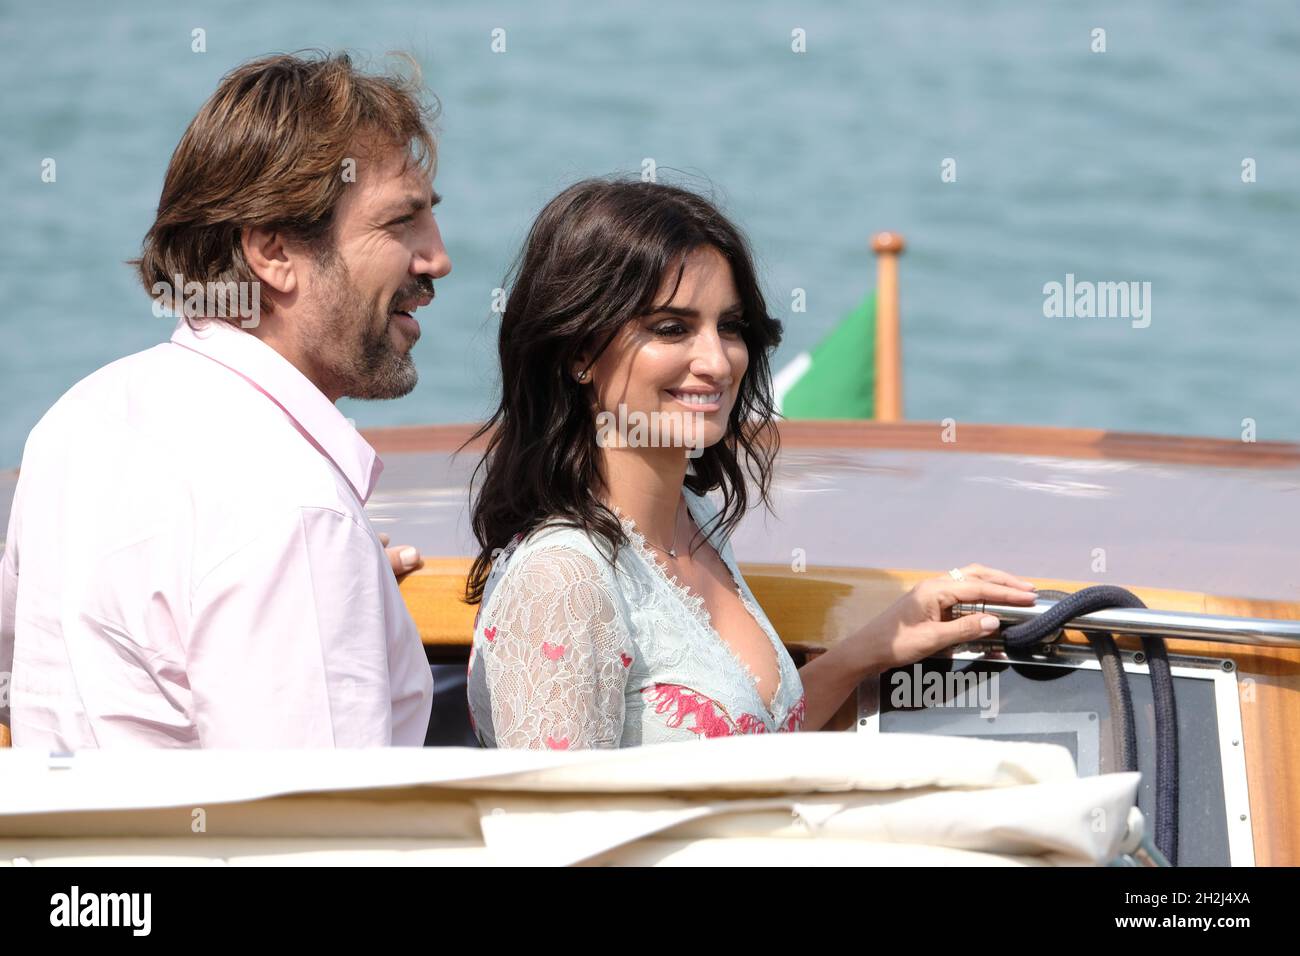 Actress Penelope Cruz and Actor Javier Bardem arrives at The 75th Venice International Film Festival in Venice, Italy, September 06, 2017. (MvS) Stock Photo